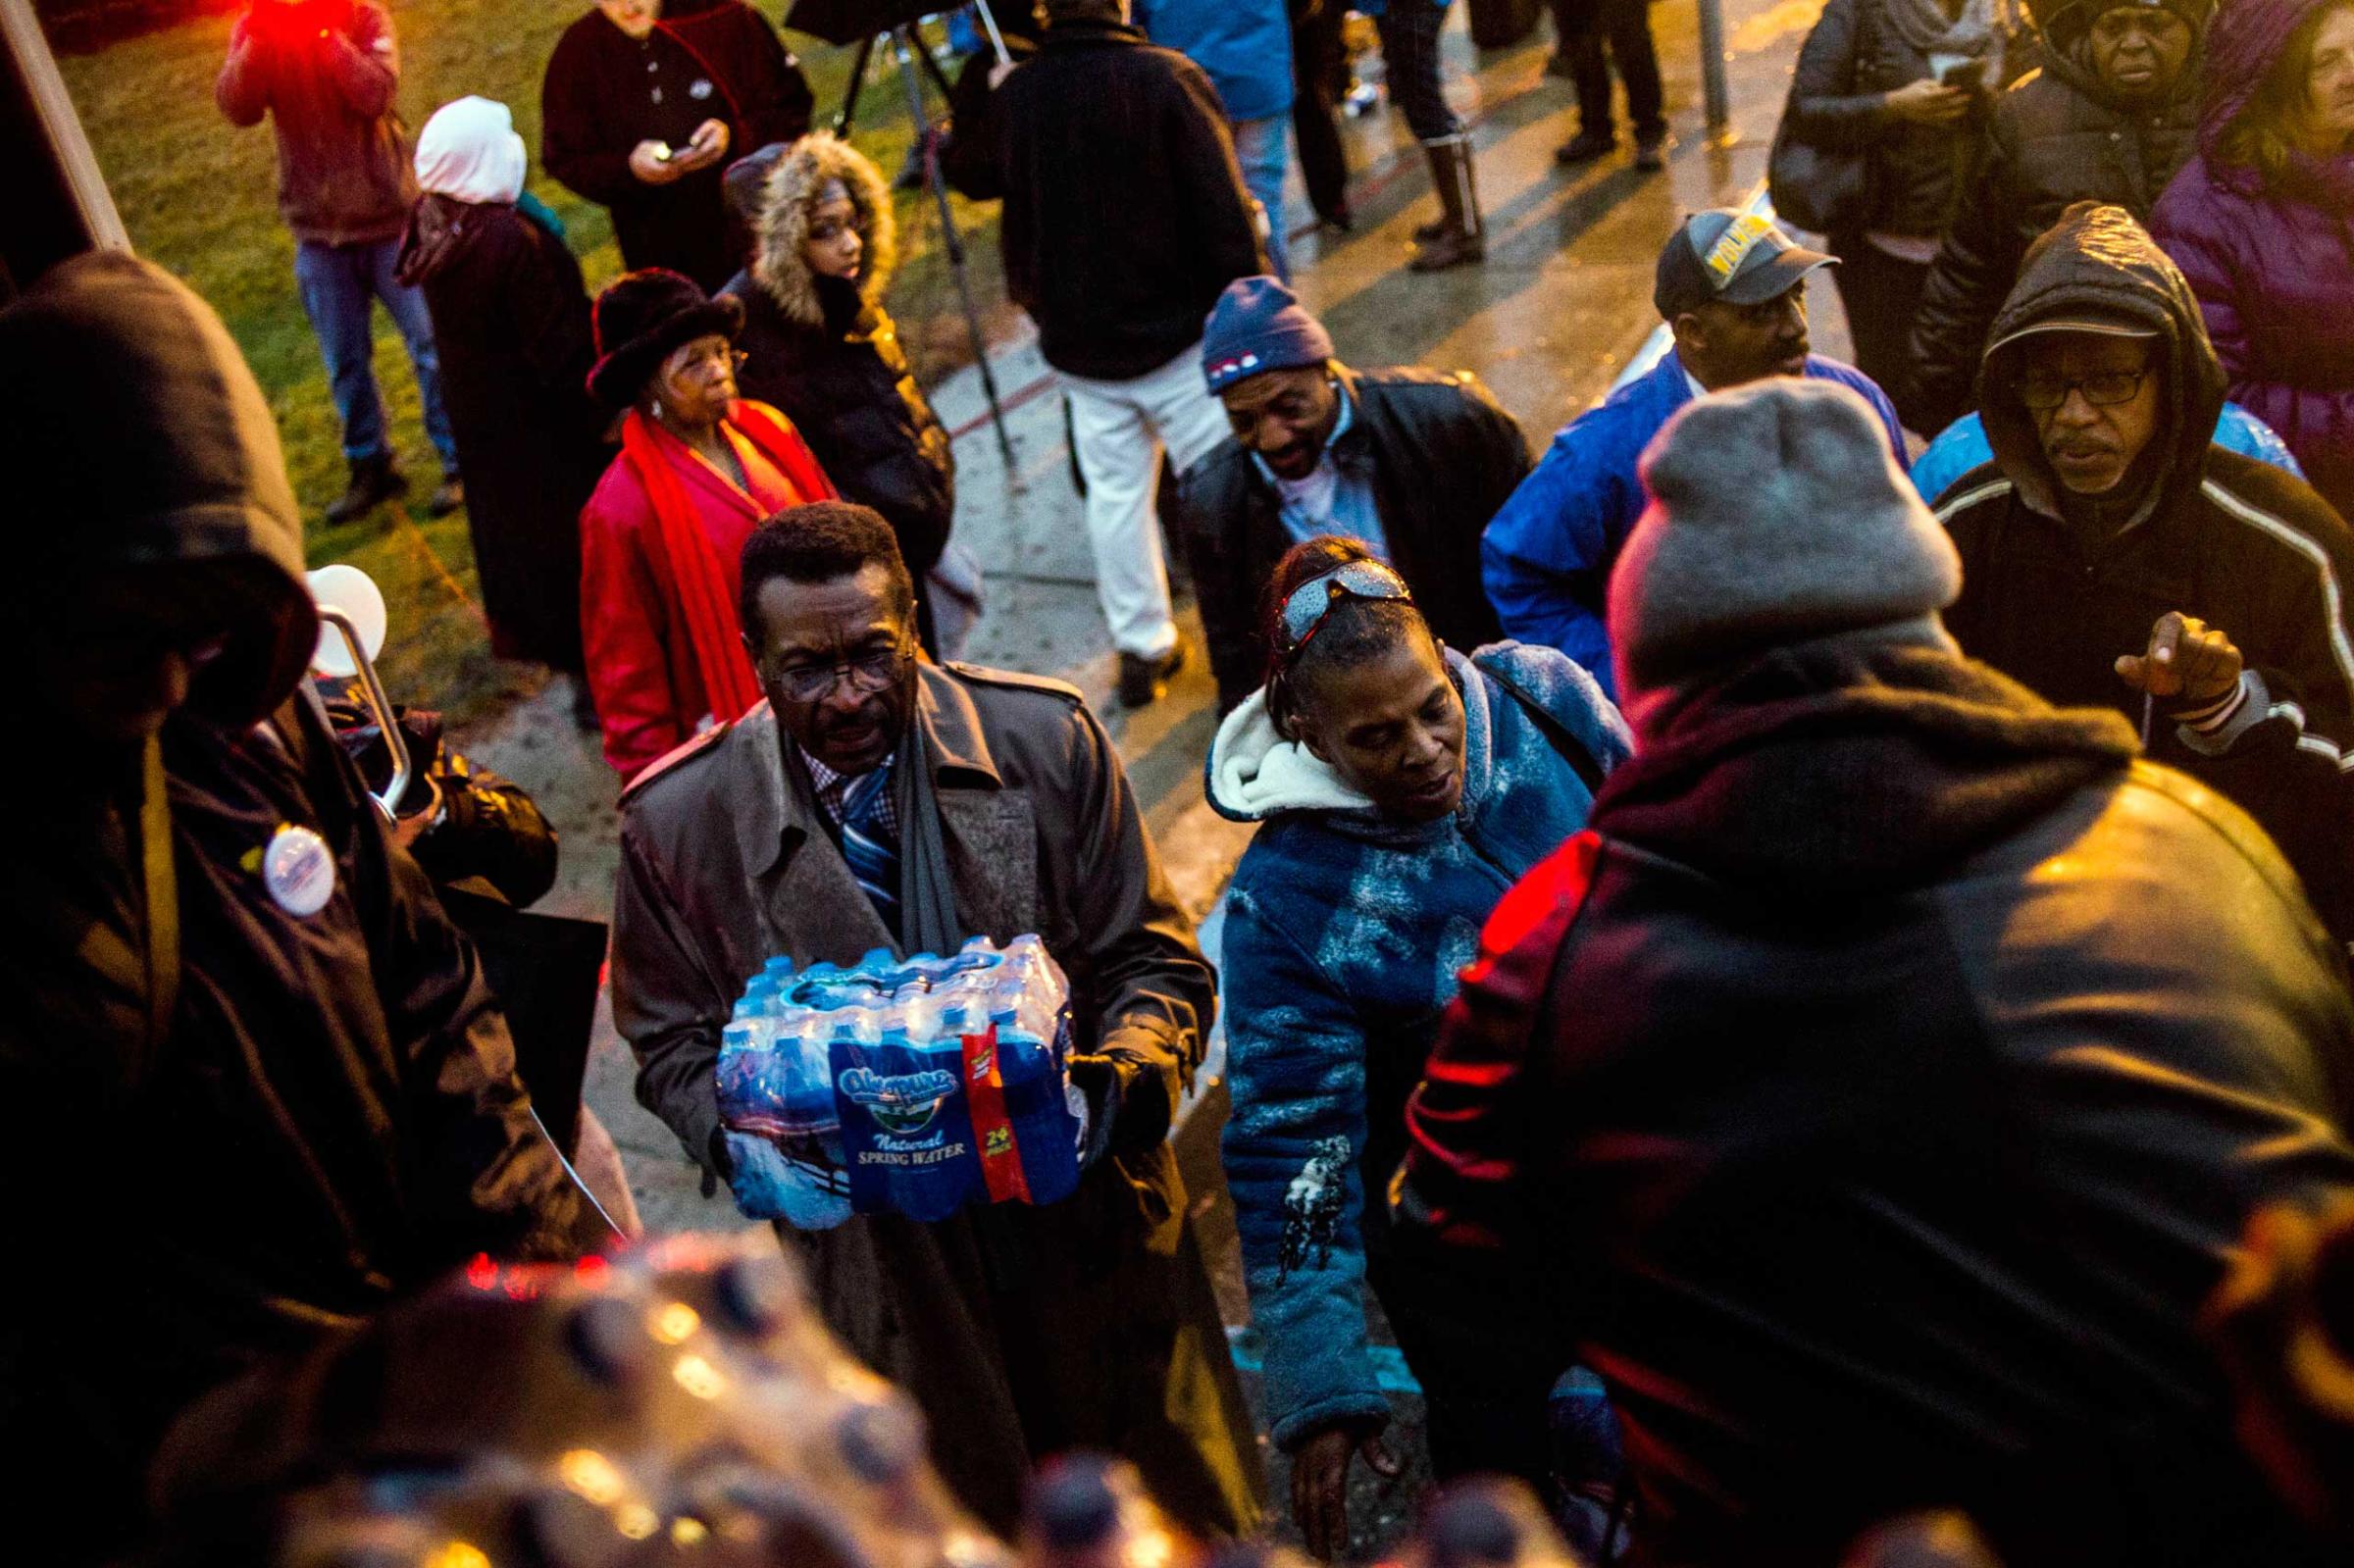 Flint residents line up for free bottled water as activists outside of City Hall protest Michigan Gov. Rick Snyder's handling of the water crisis on Jan. 8, 2016 in Flint. Mich.